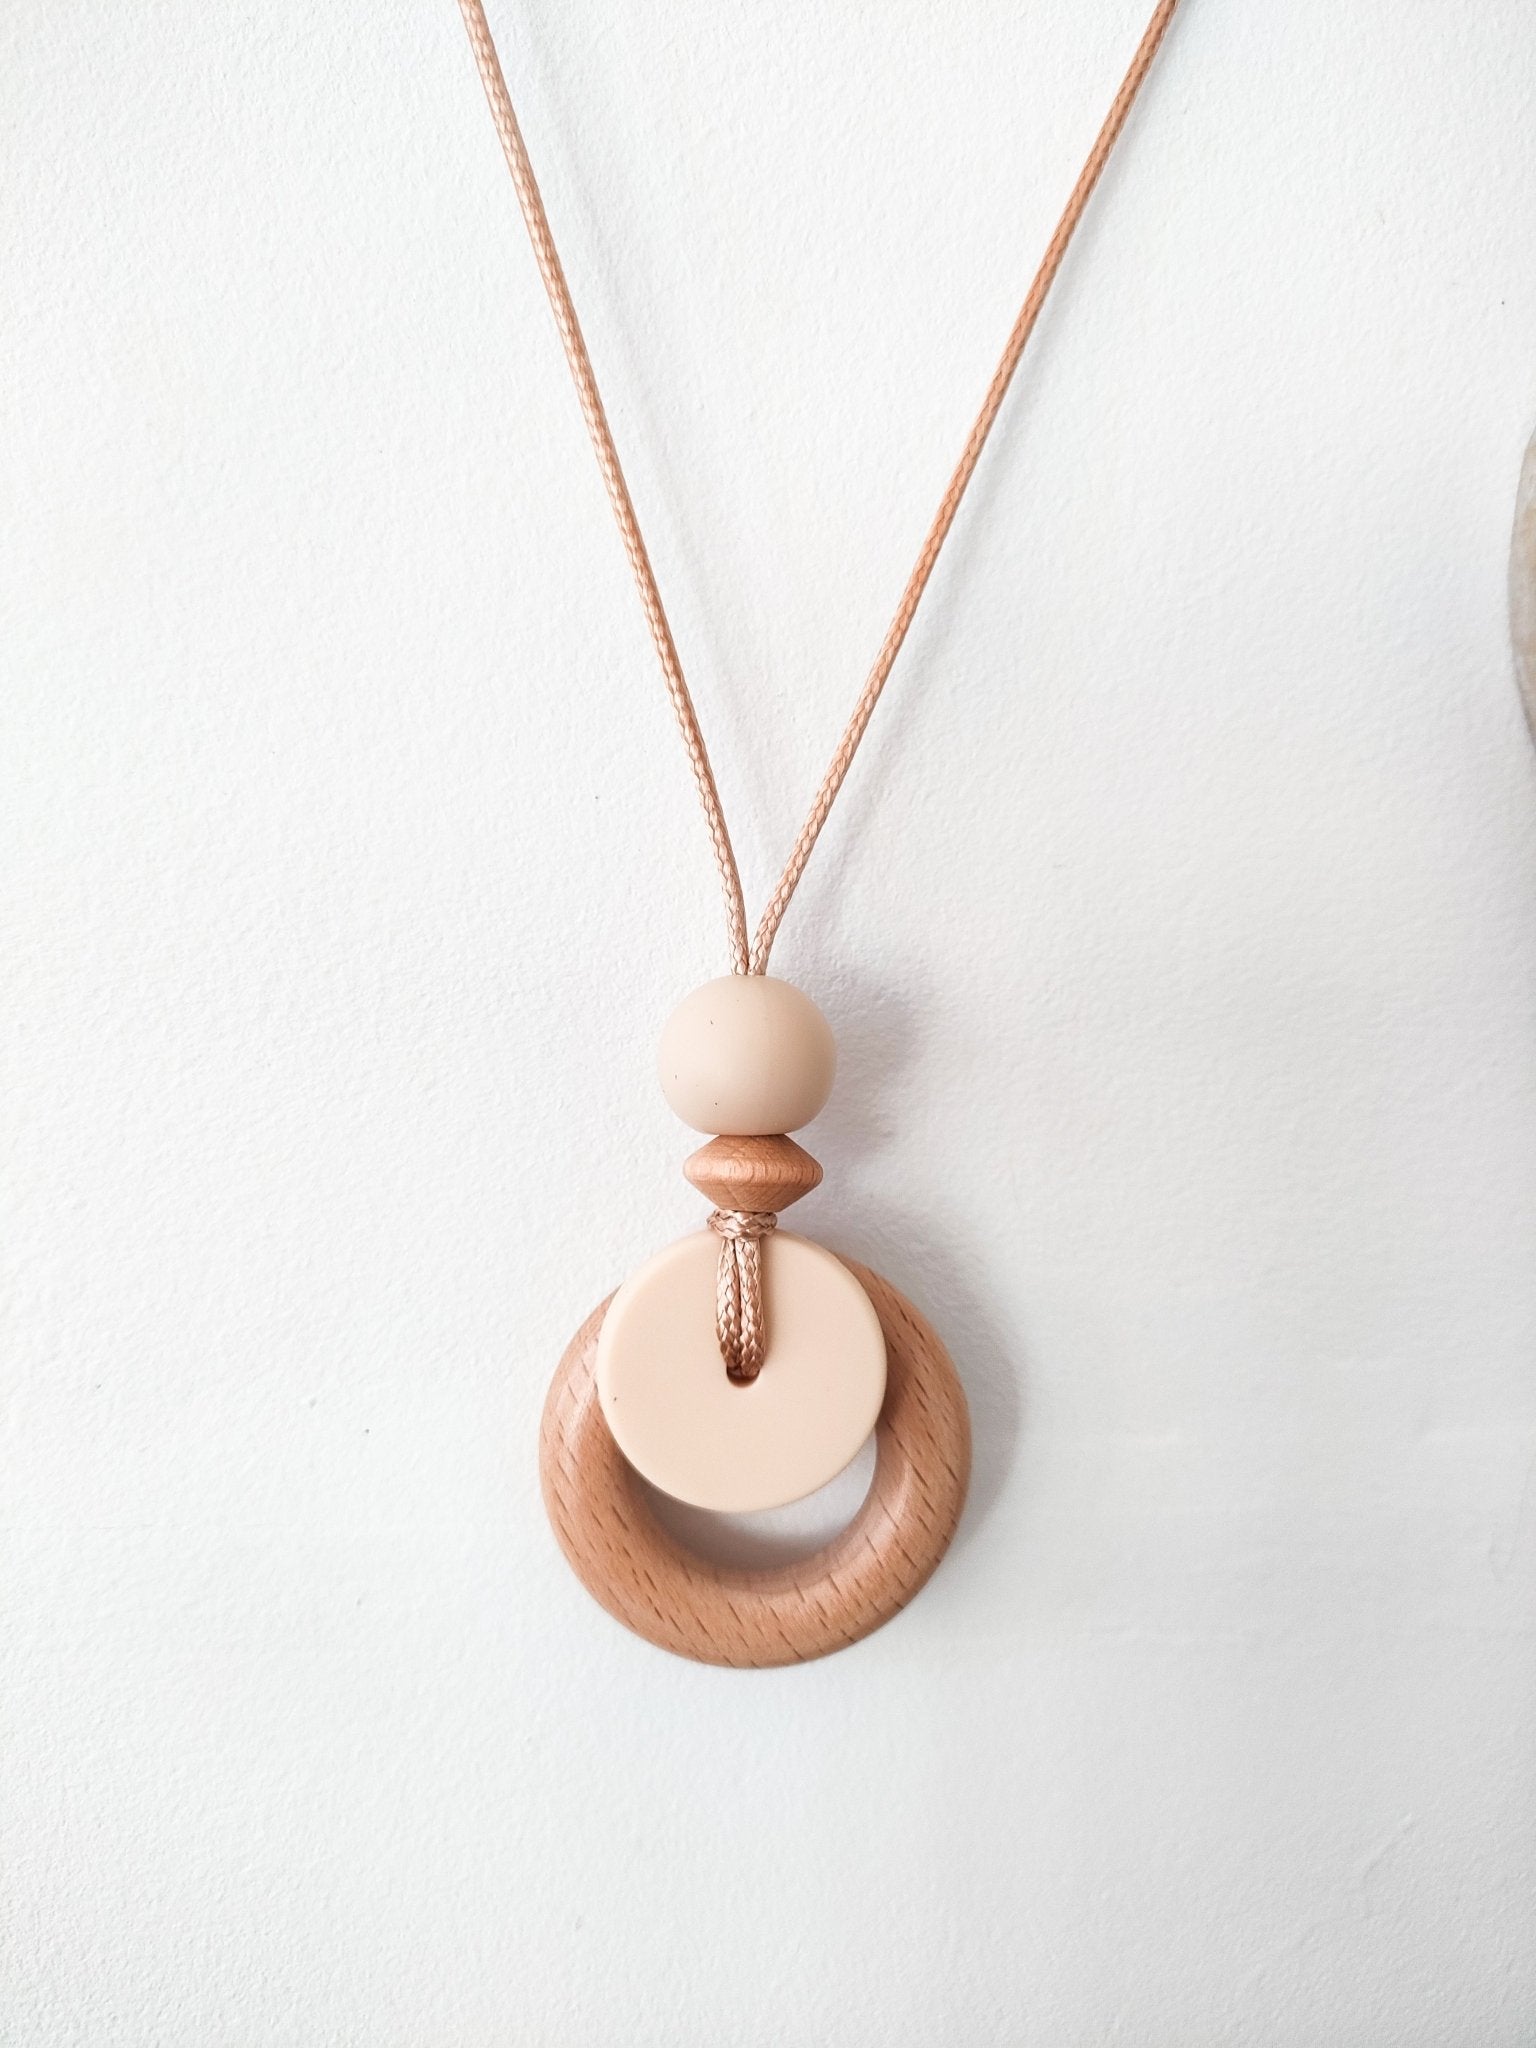 Cream Pendant - Bennie Blooms Breastfeeding, Teething and Fiddle Jewellery at its finest.